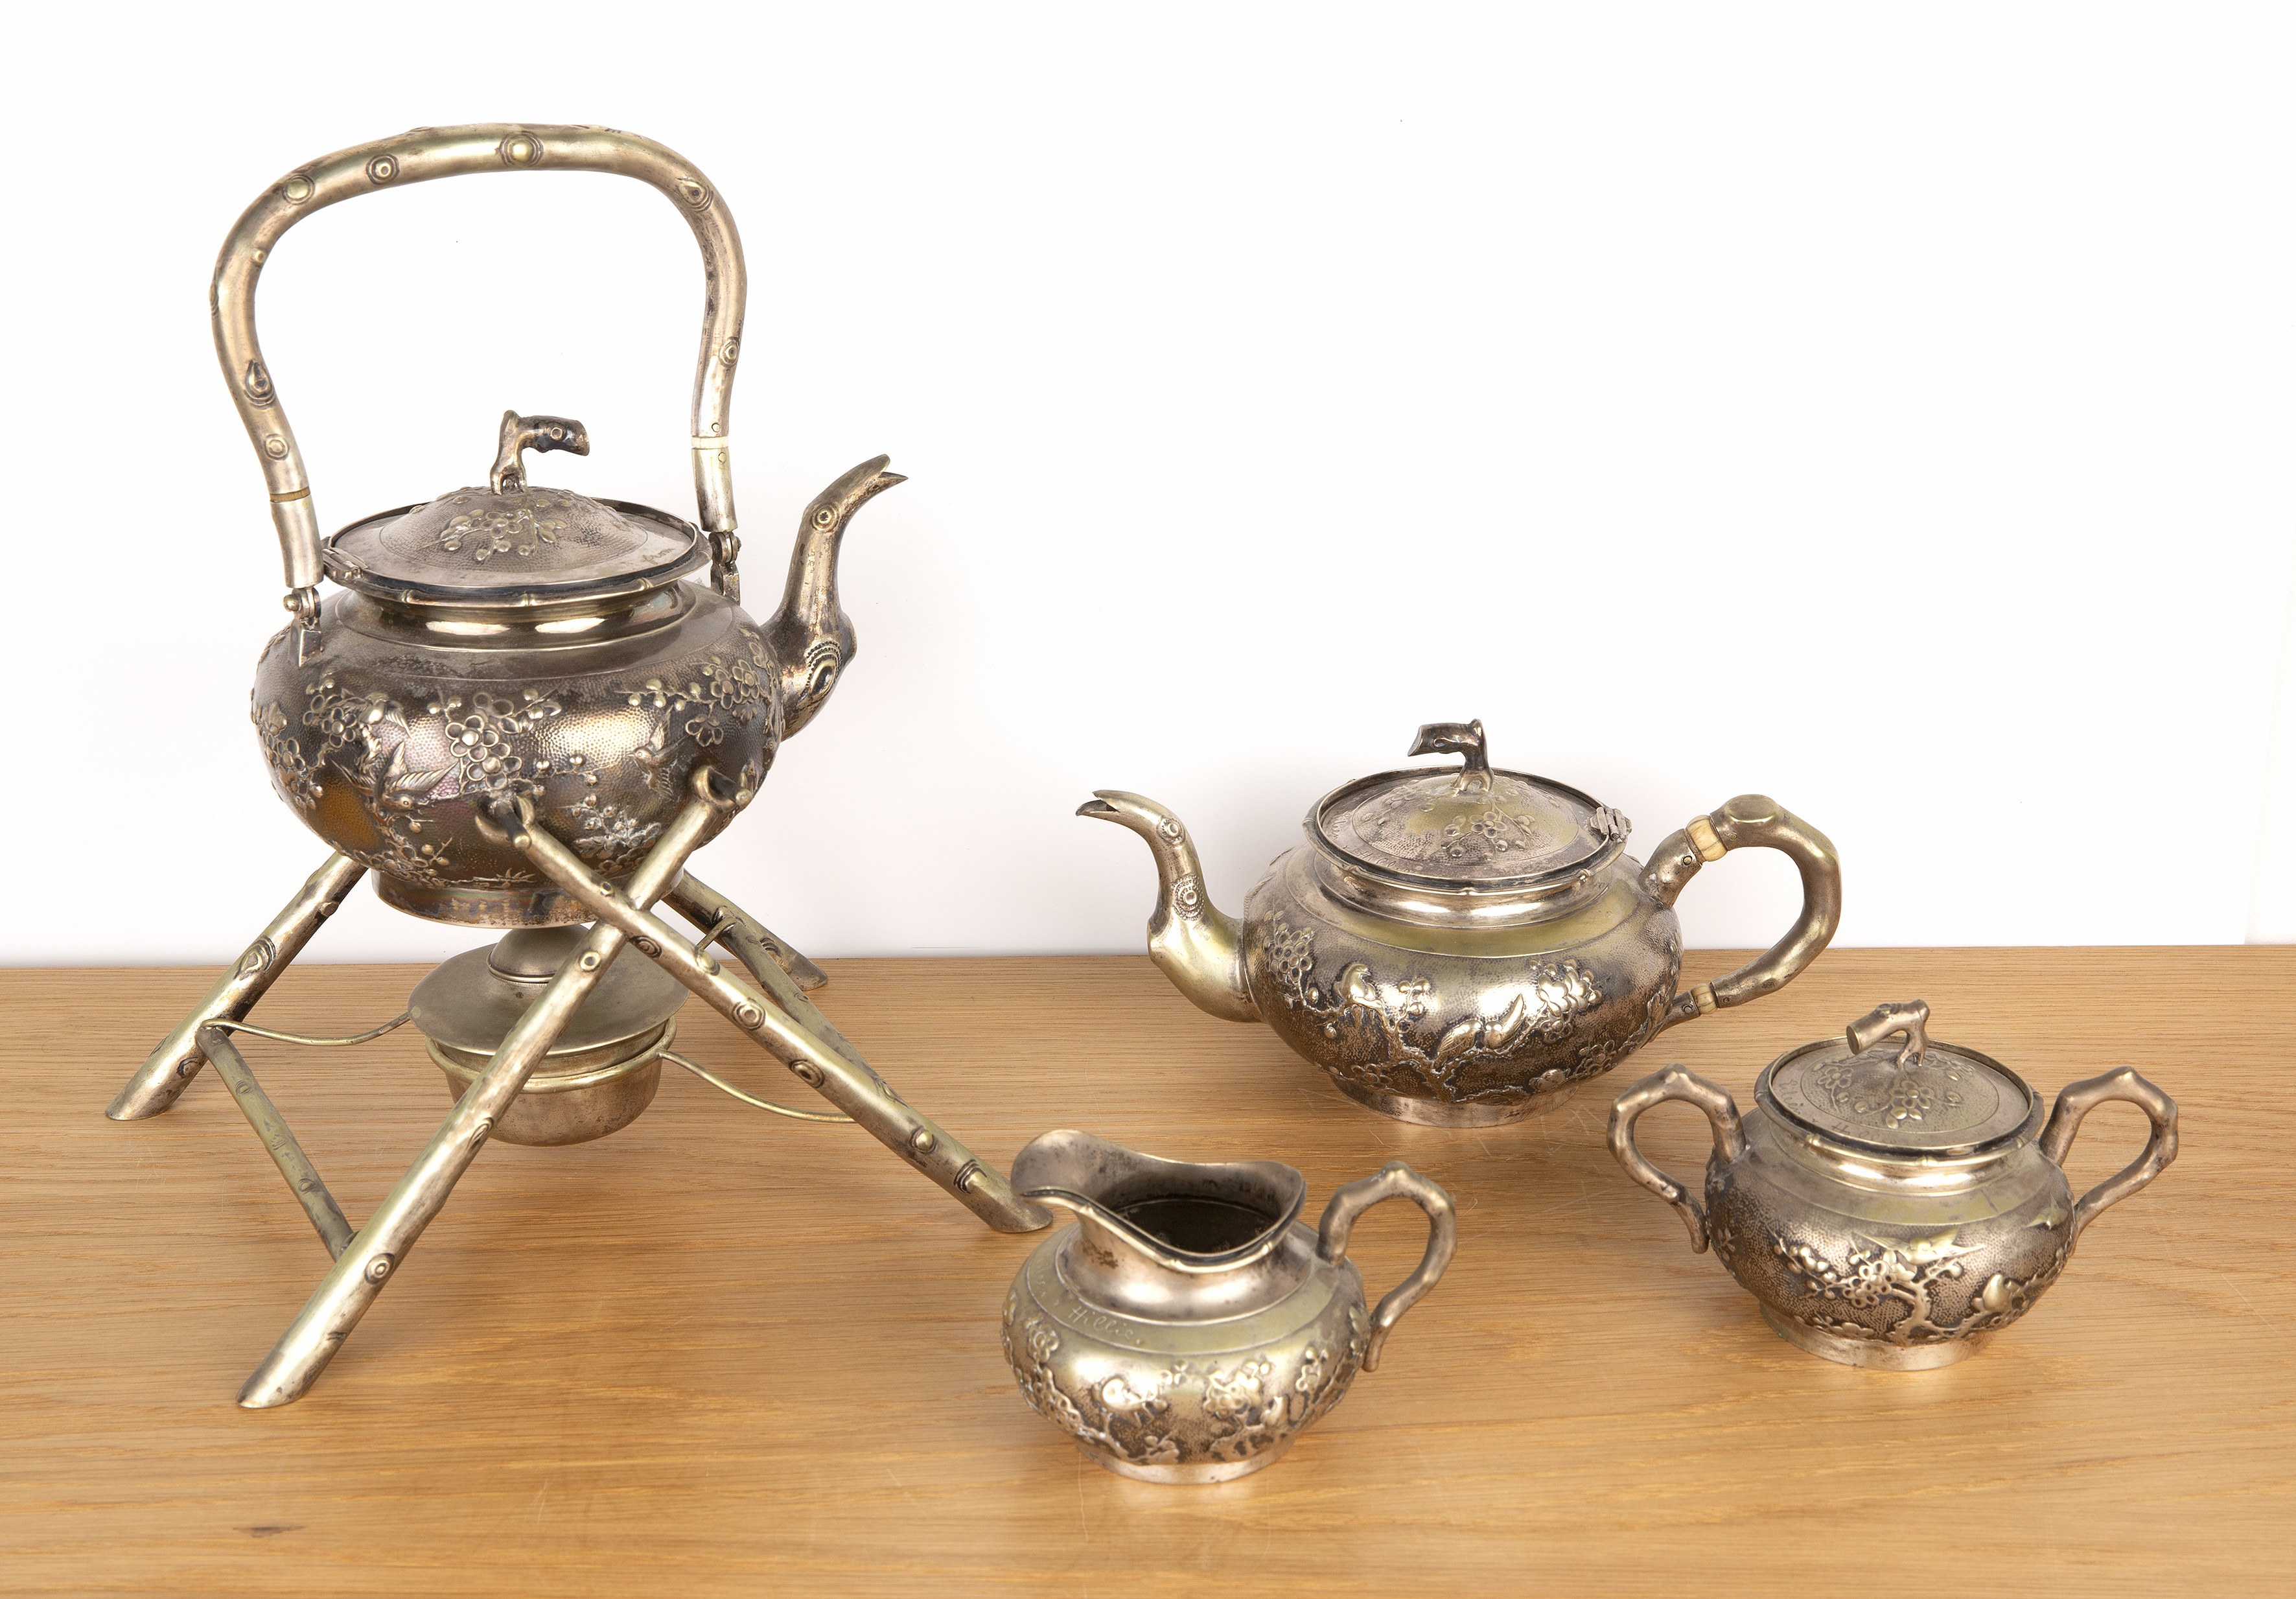 Zeewo (Shanghai) silver/white metal tea set Chinese, Export, late 19th/early 20th Century - Image 2 of 5